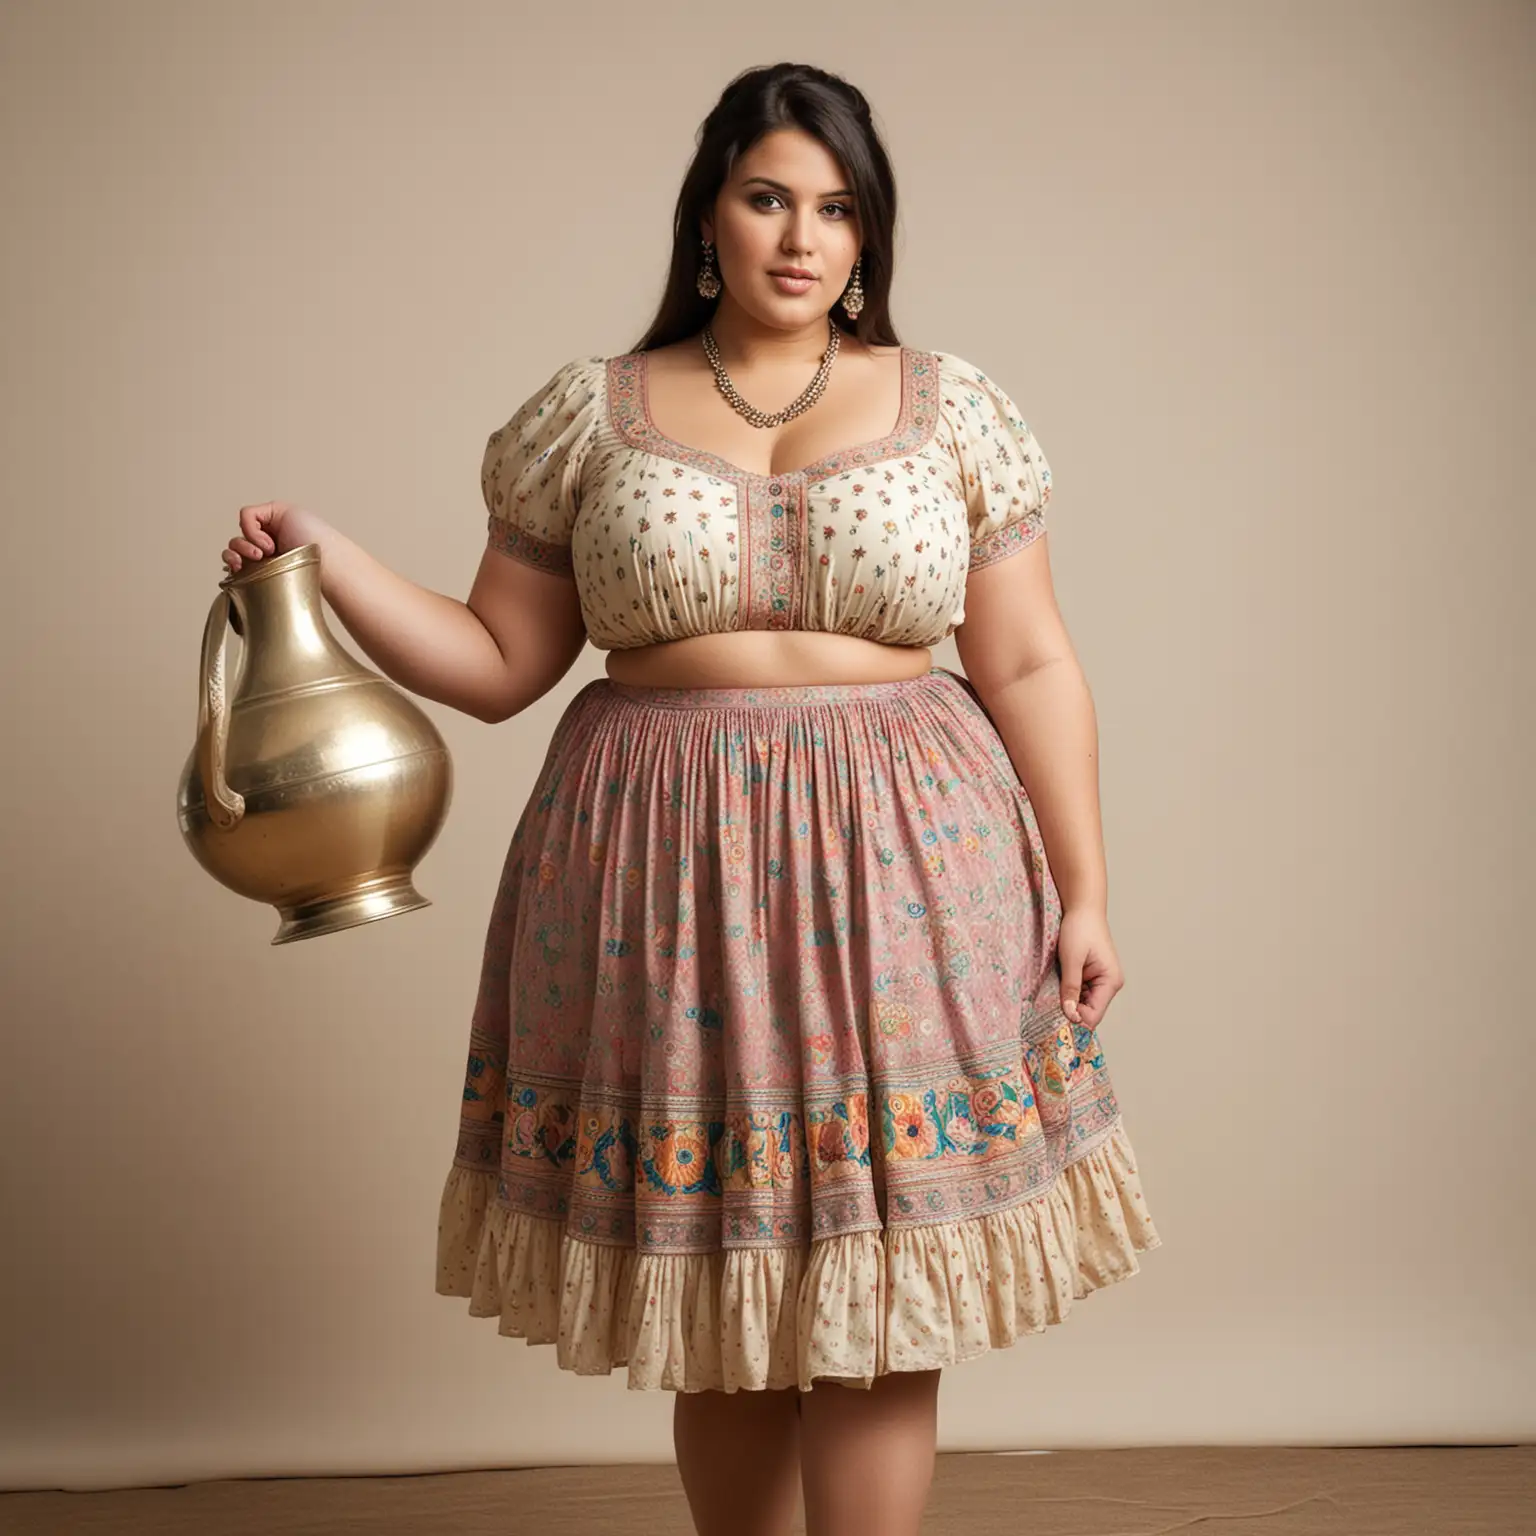  A Sexy BBW woman, wearing an old Indian blouse, and petticoat, carrying a pitcher on her chubby waist.